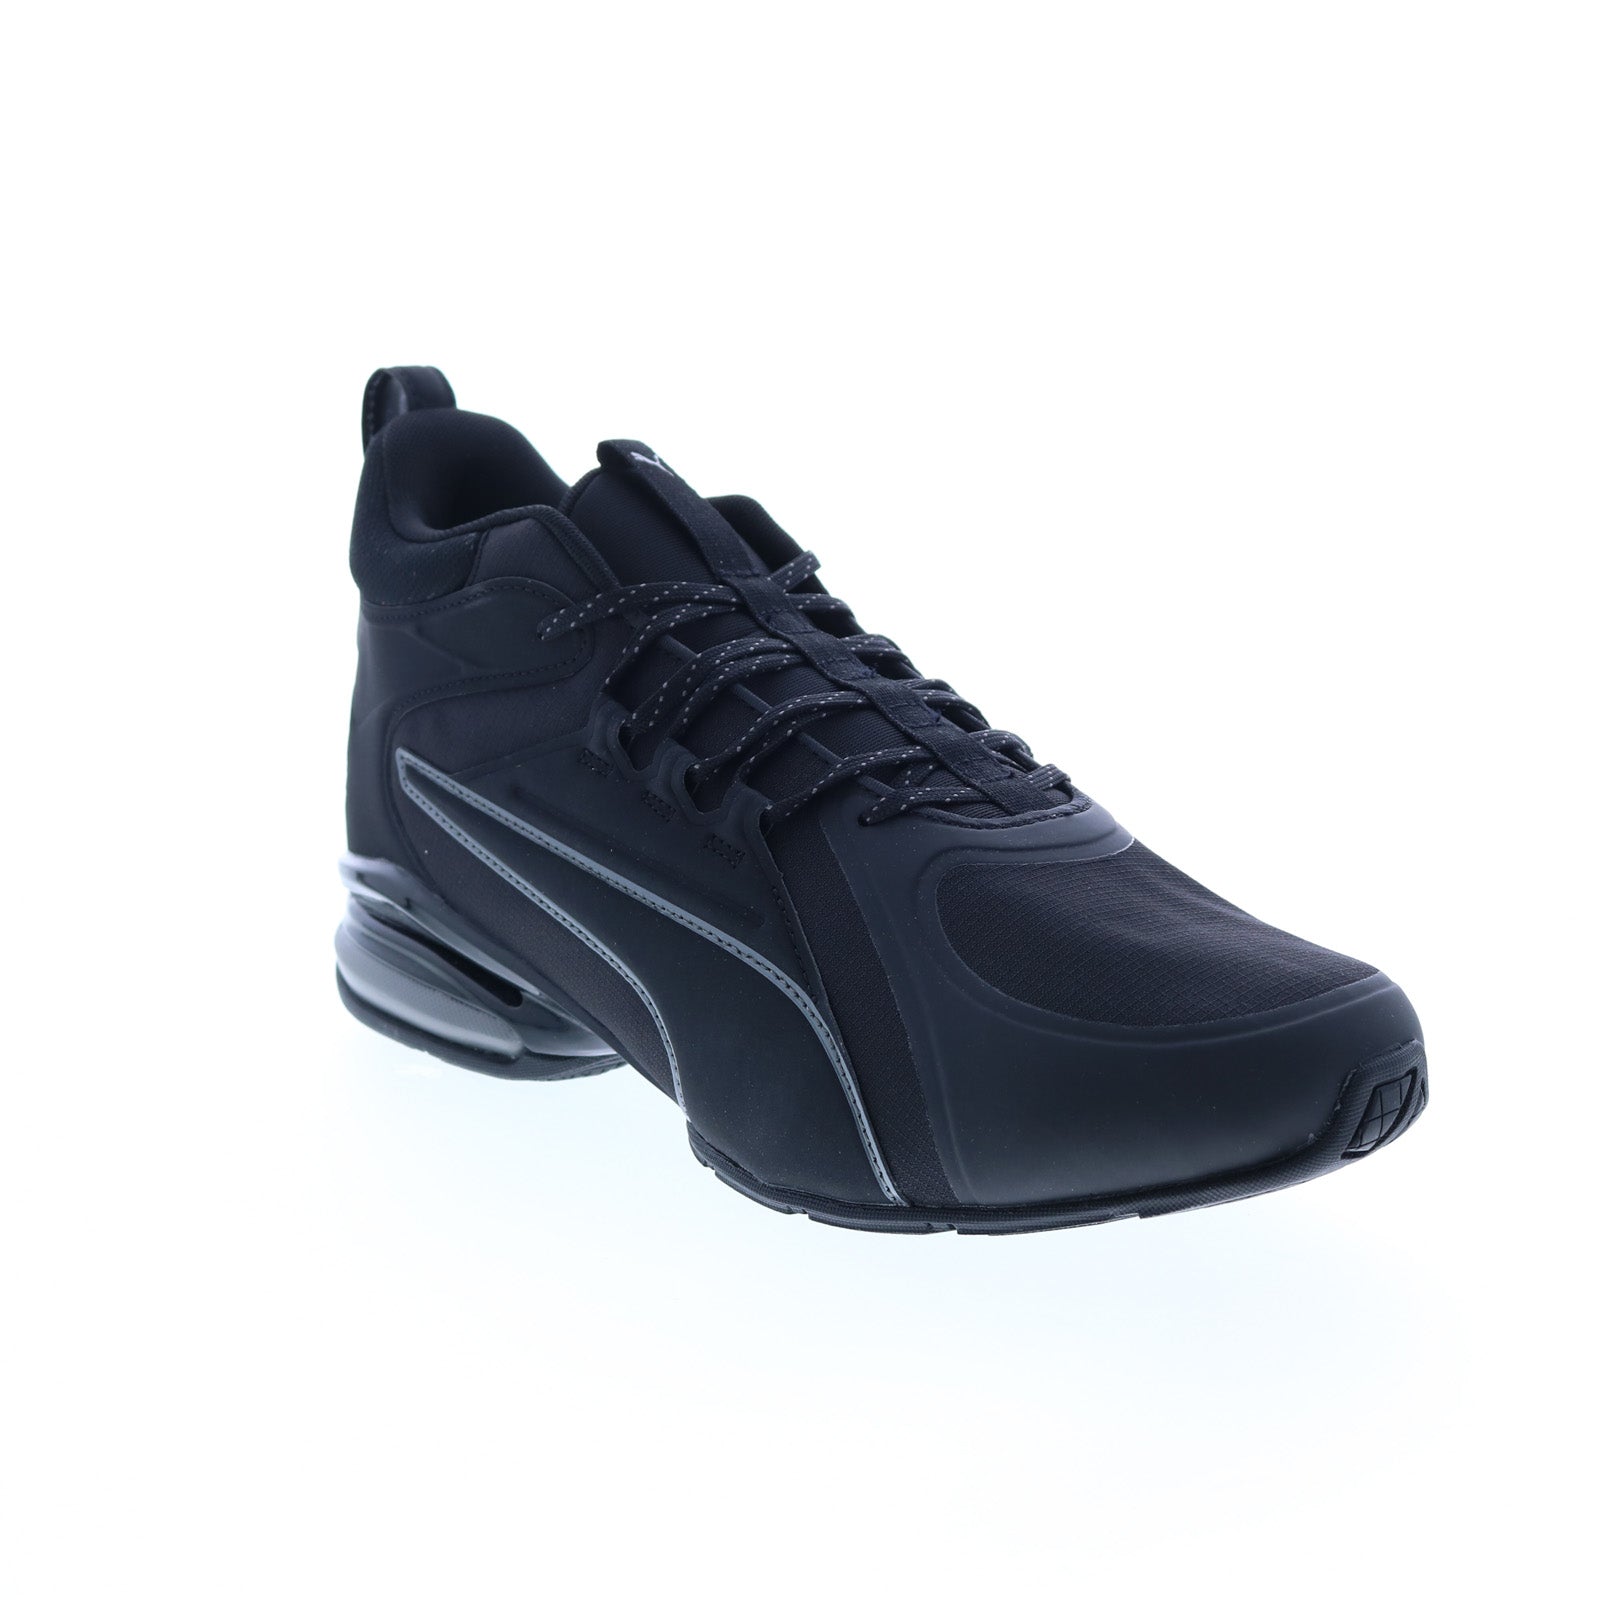 Puma Axelion Mid 37711901 Black Canvas Athletic Running - Shoes